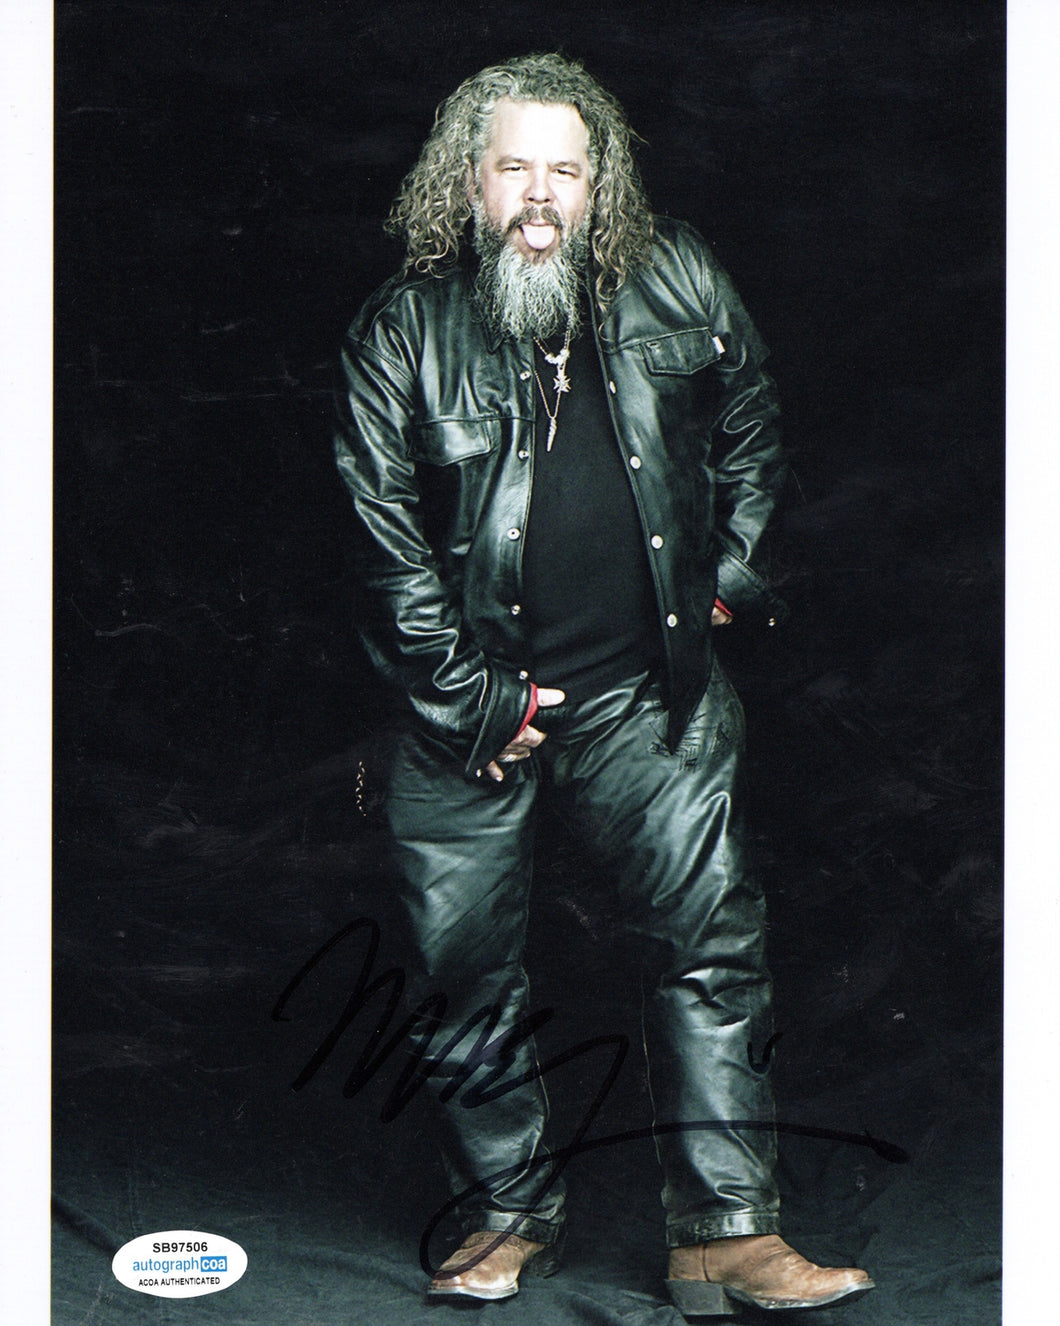 Mark Boone Jr. Autographed Signed 8x10 Sons of Anarchy Photo